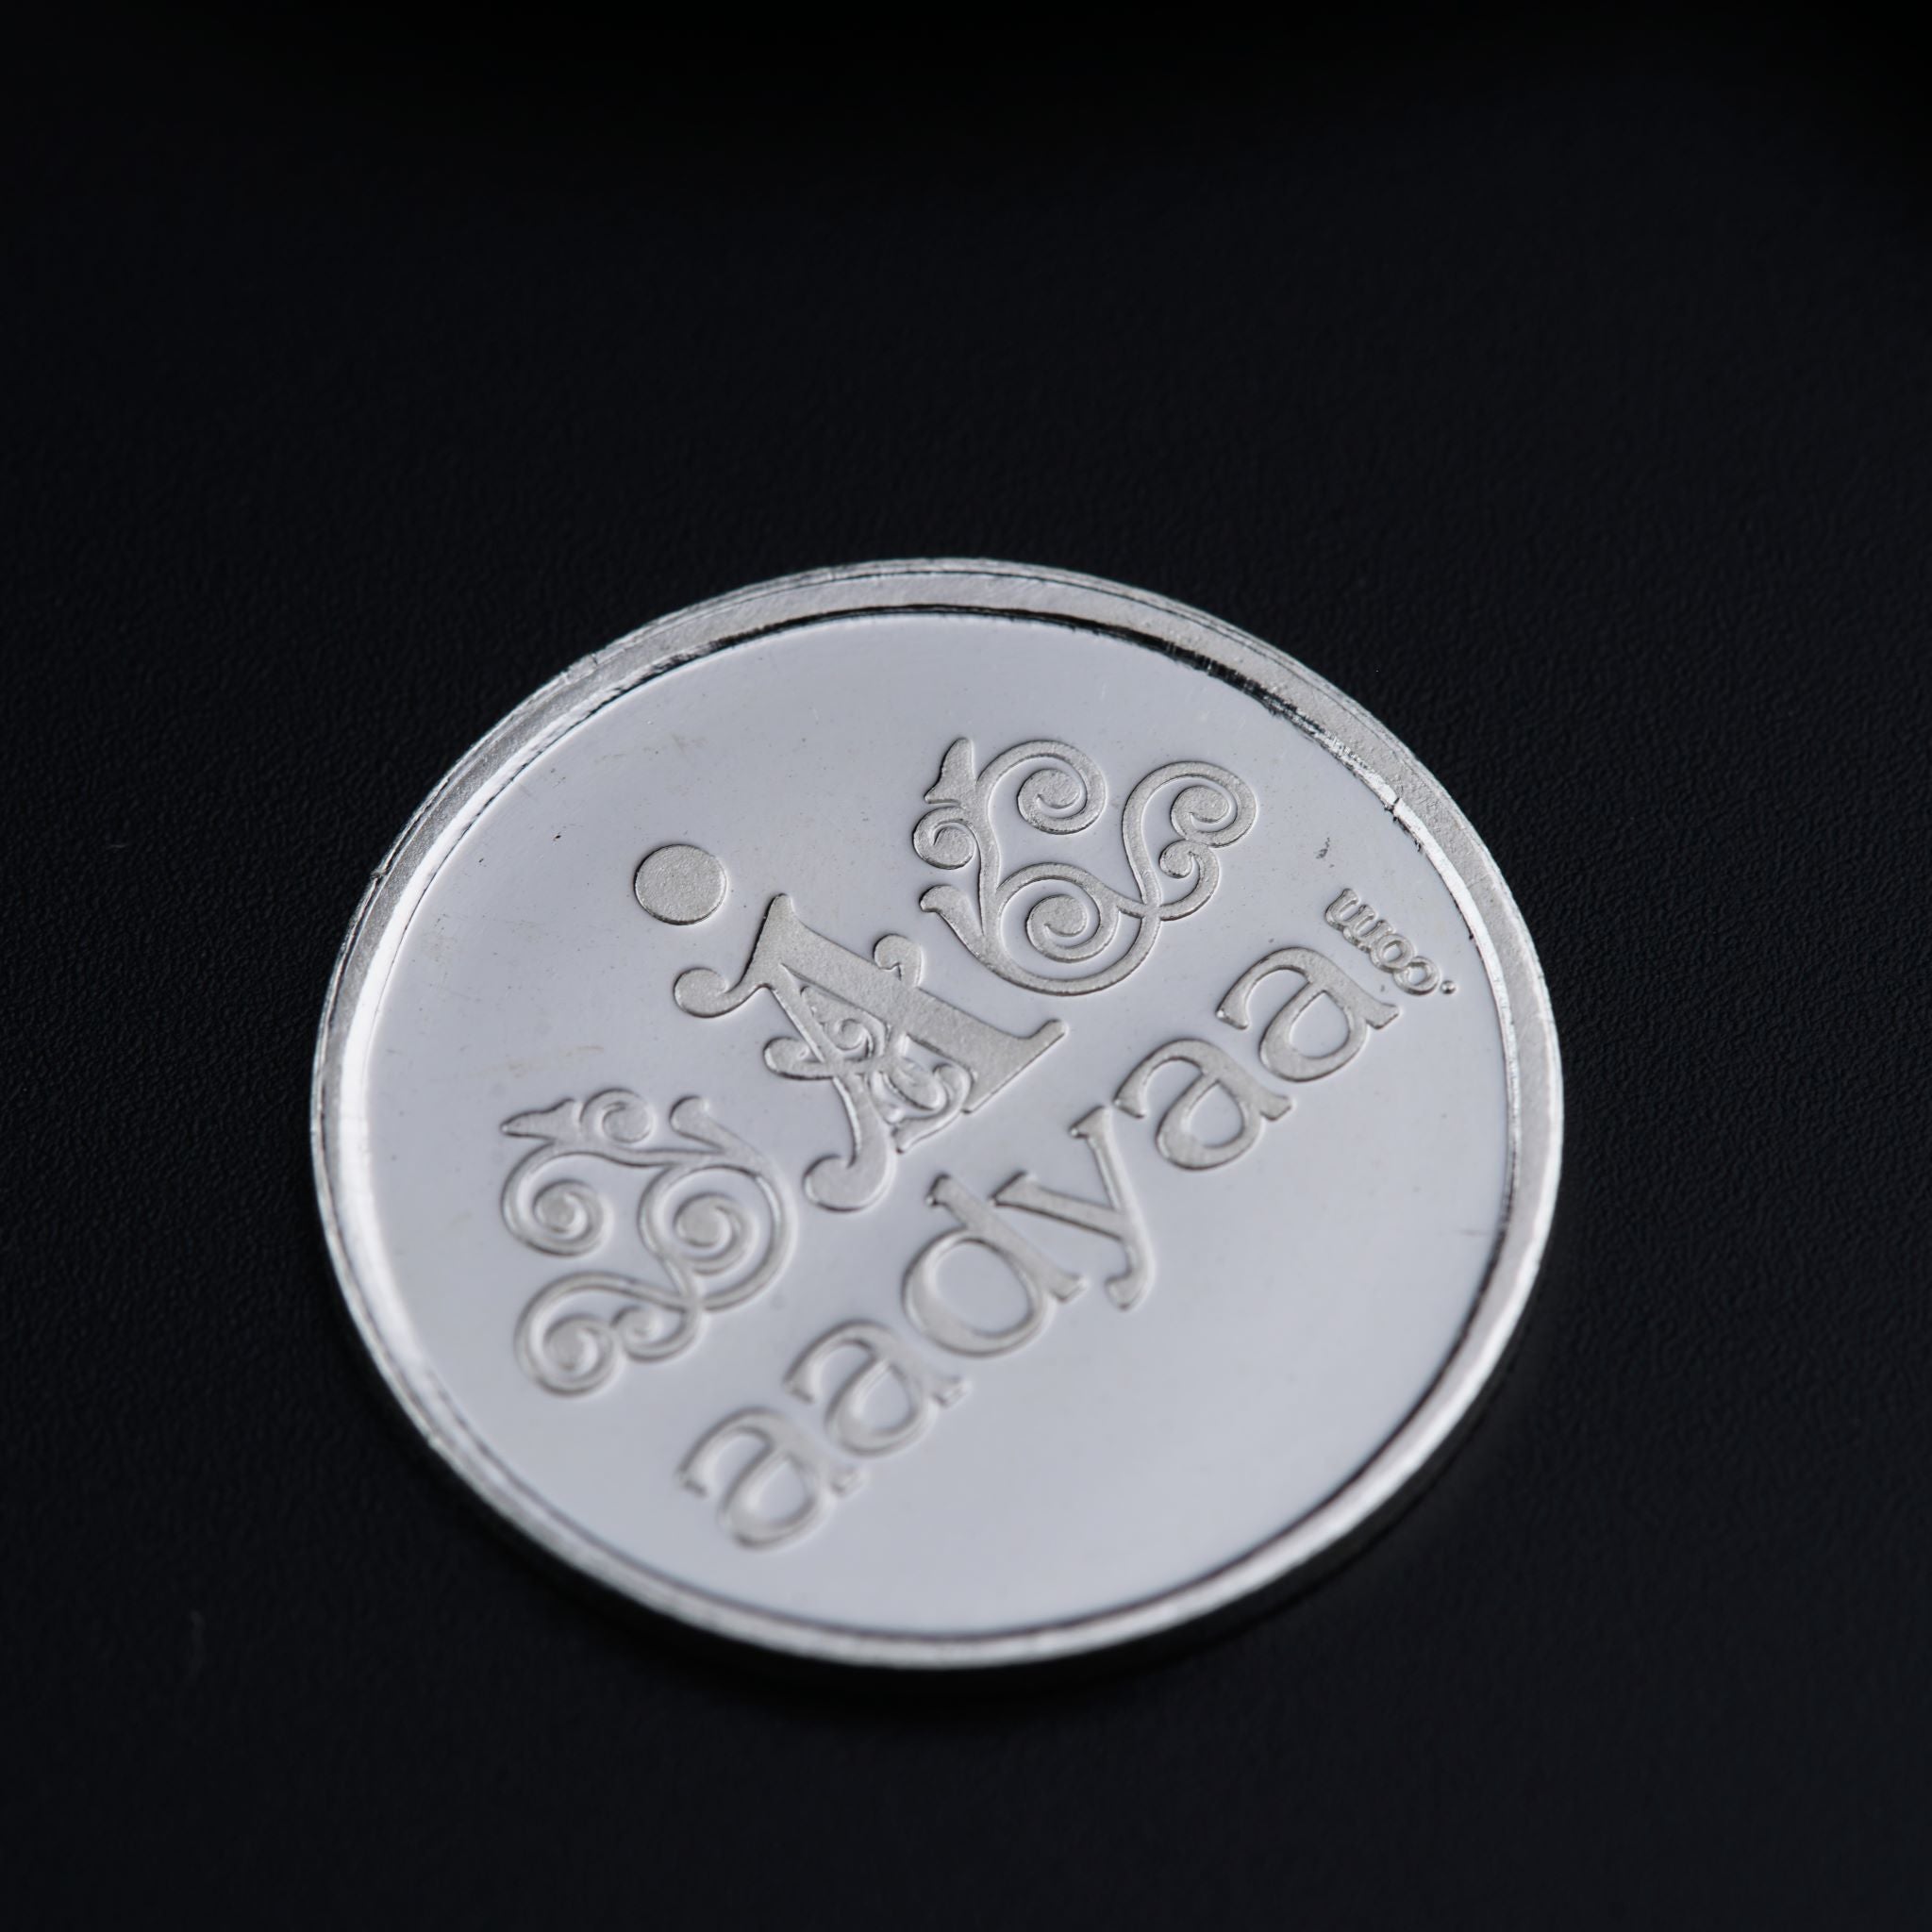 a close up of a coin on a black surface